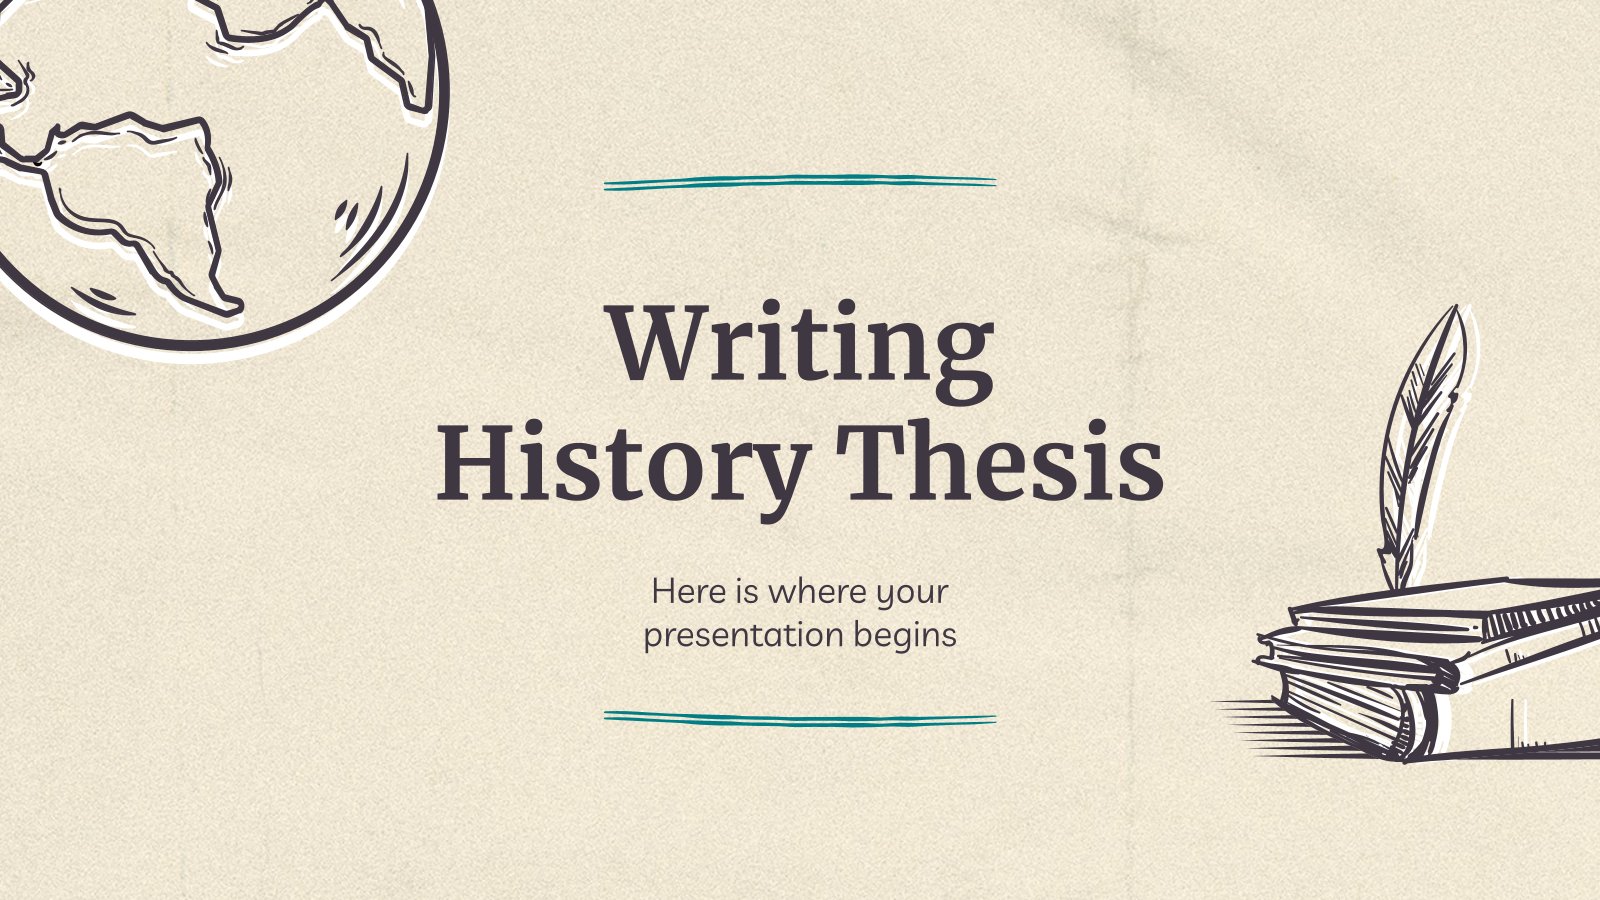 Writing History Thesis presentation template 